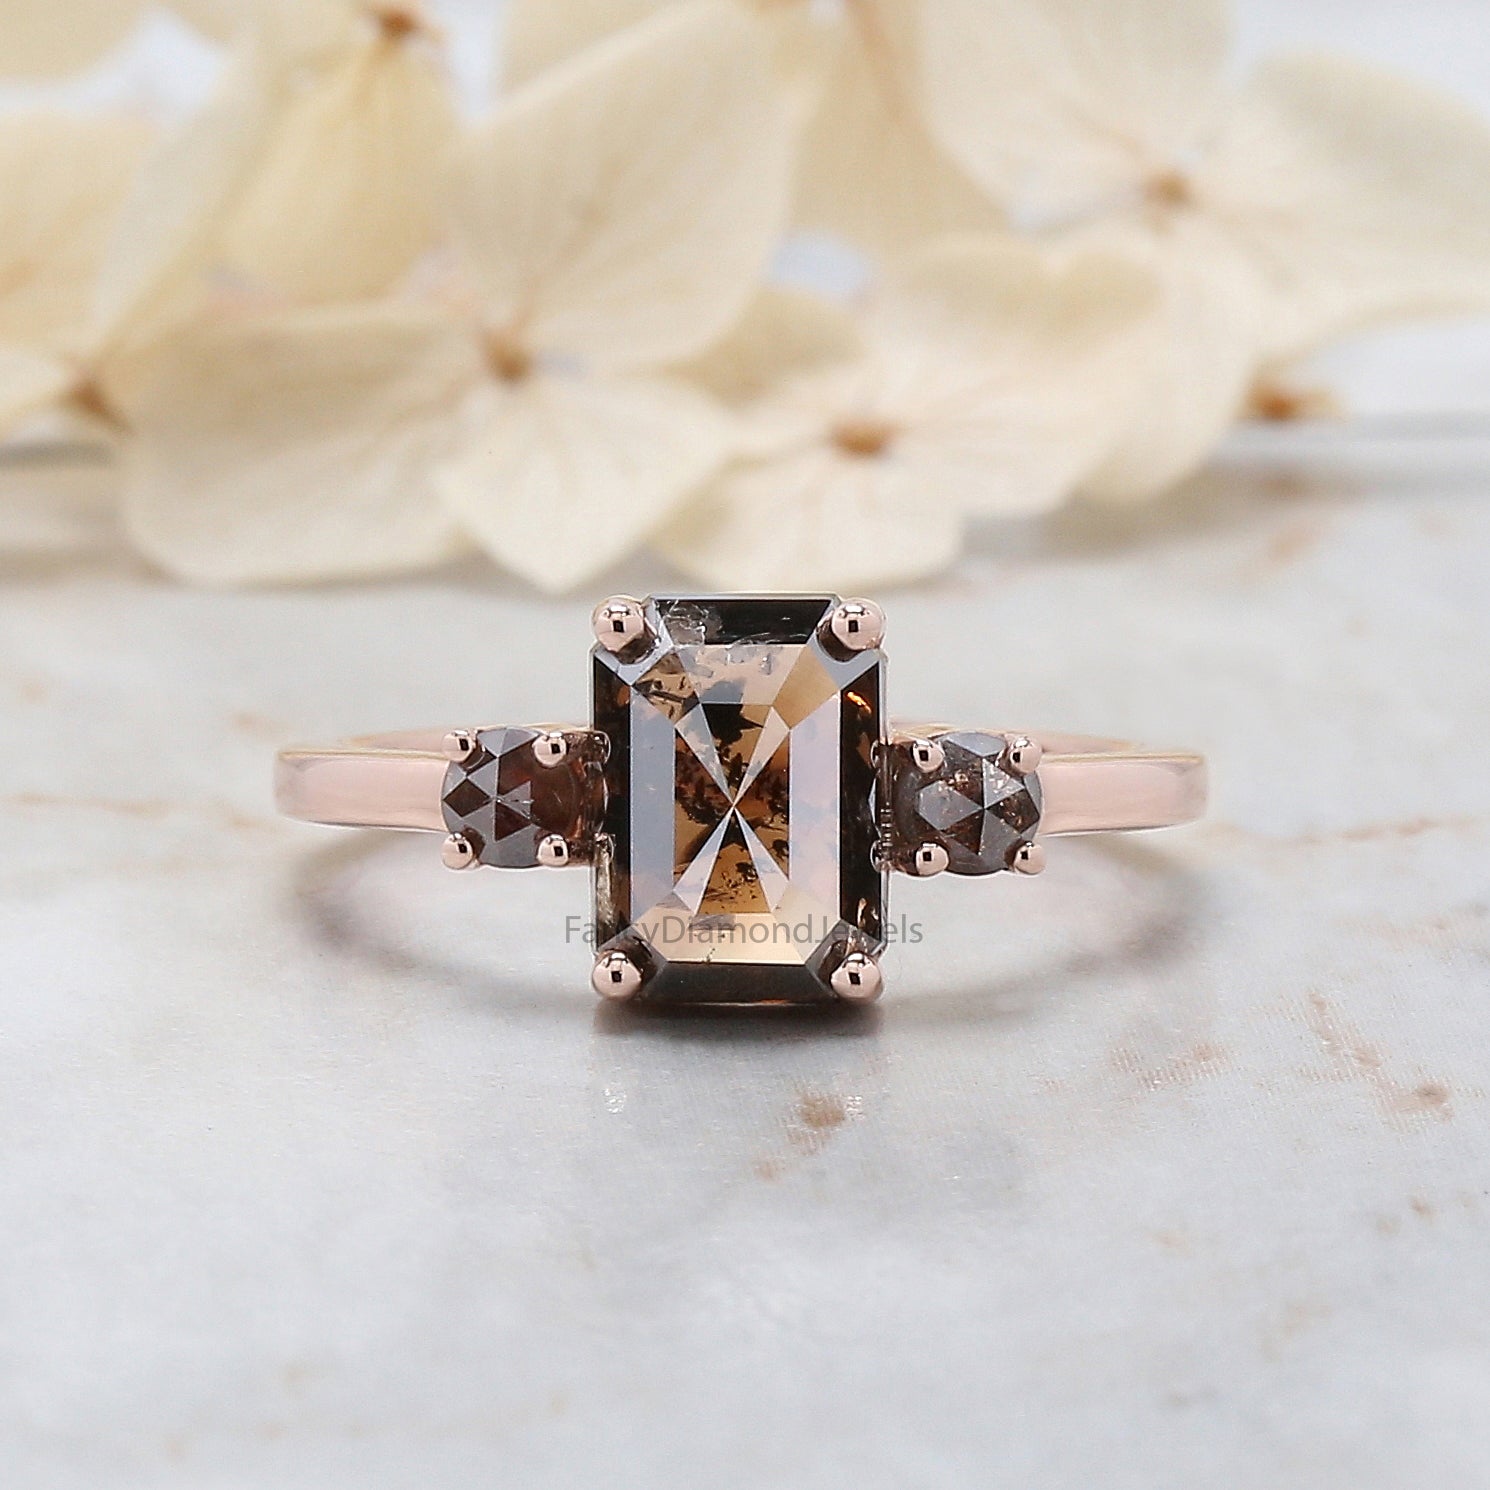 Emerald Cut Brown Color Diamond Ring 1.93 Ct 8.40 MM Emerald Shape Diamond Ring 14K Rose Gold Silver Engagement Ring Gift For Her QL9595